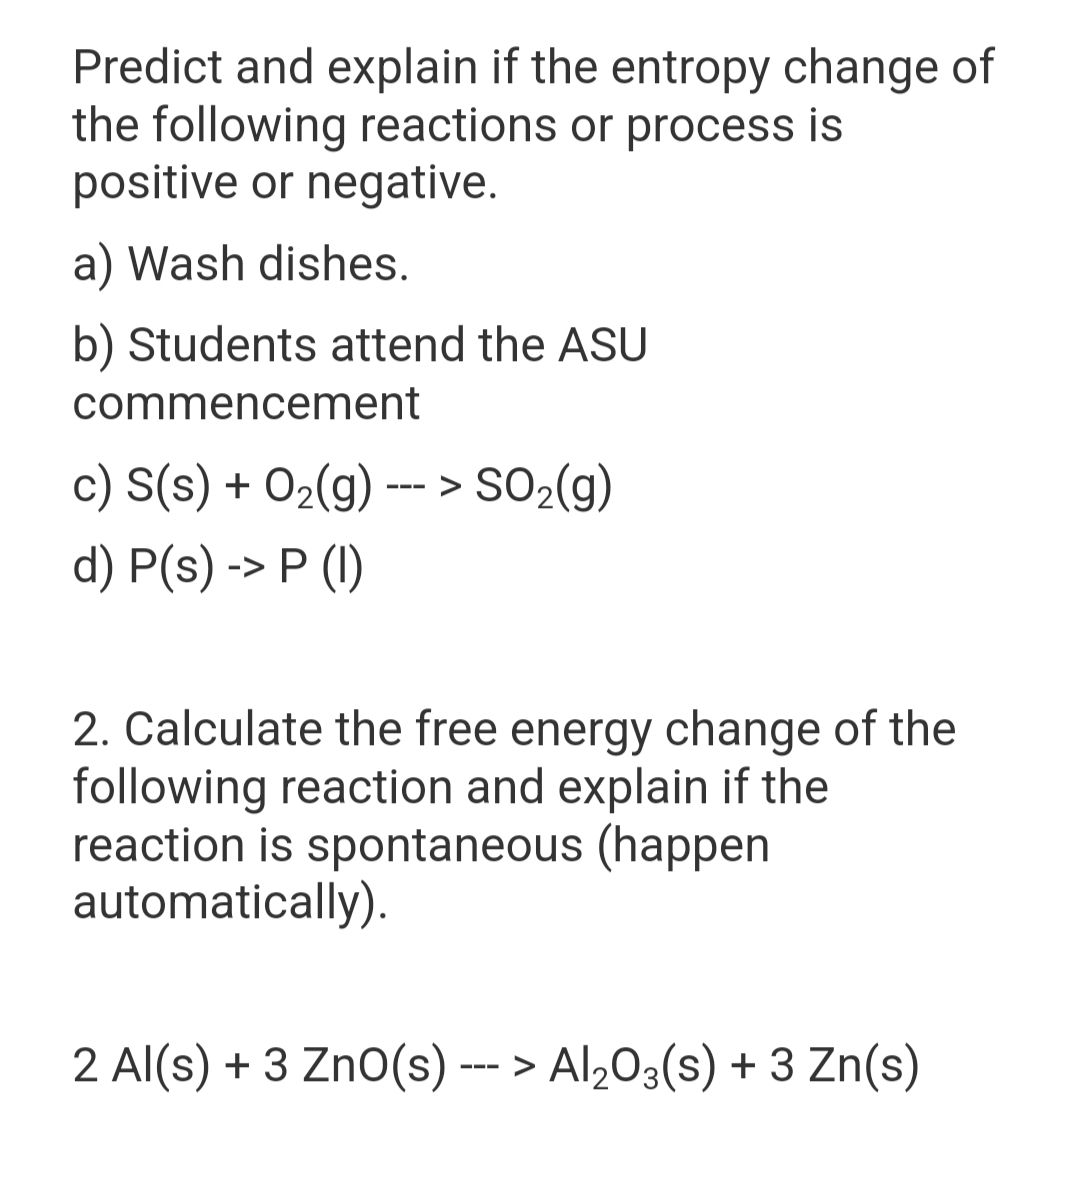 Predict and explain if the entropy change of
the following reactions or process is
positive or negative.
a) Wash dishes.
b) Students attend the ASU
commencement
c) S(s) + O2(g) --- > SO2(g)
d) P(s) -> P (I)
2. Calculate the free energy change of the
following reaction and explain if the
reaction is spontaneous (happen
automatically).
2 Al(s) + 3 ZnO(s)
--- > Al,0;(s) + 3 Zn(s)
